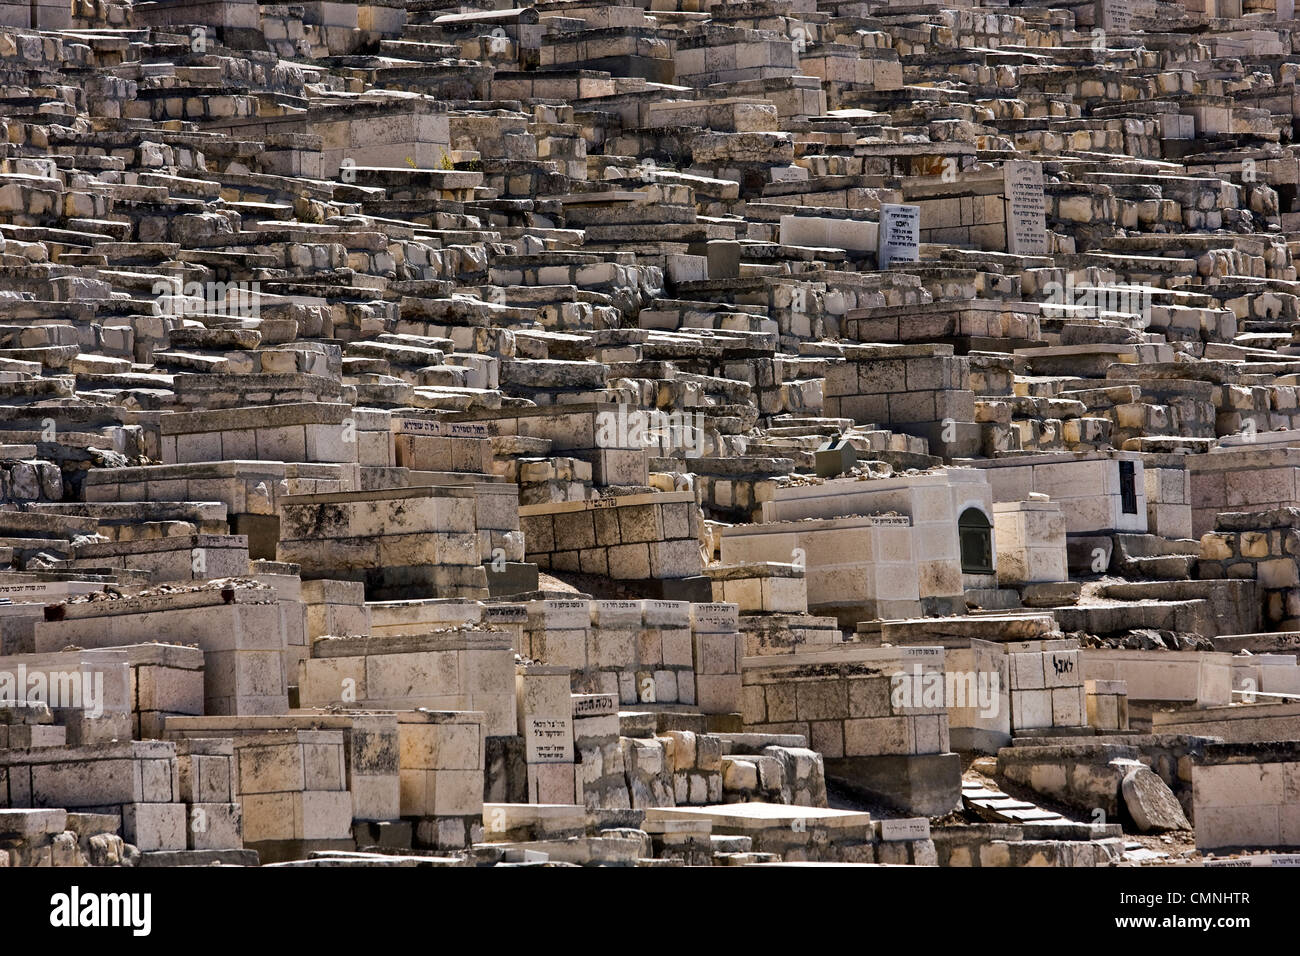 Cemetery in the Olive mountain in Jerusalem Stock Photo